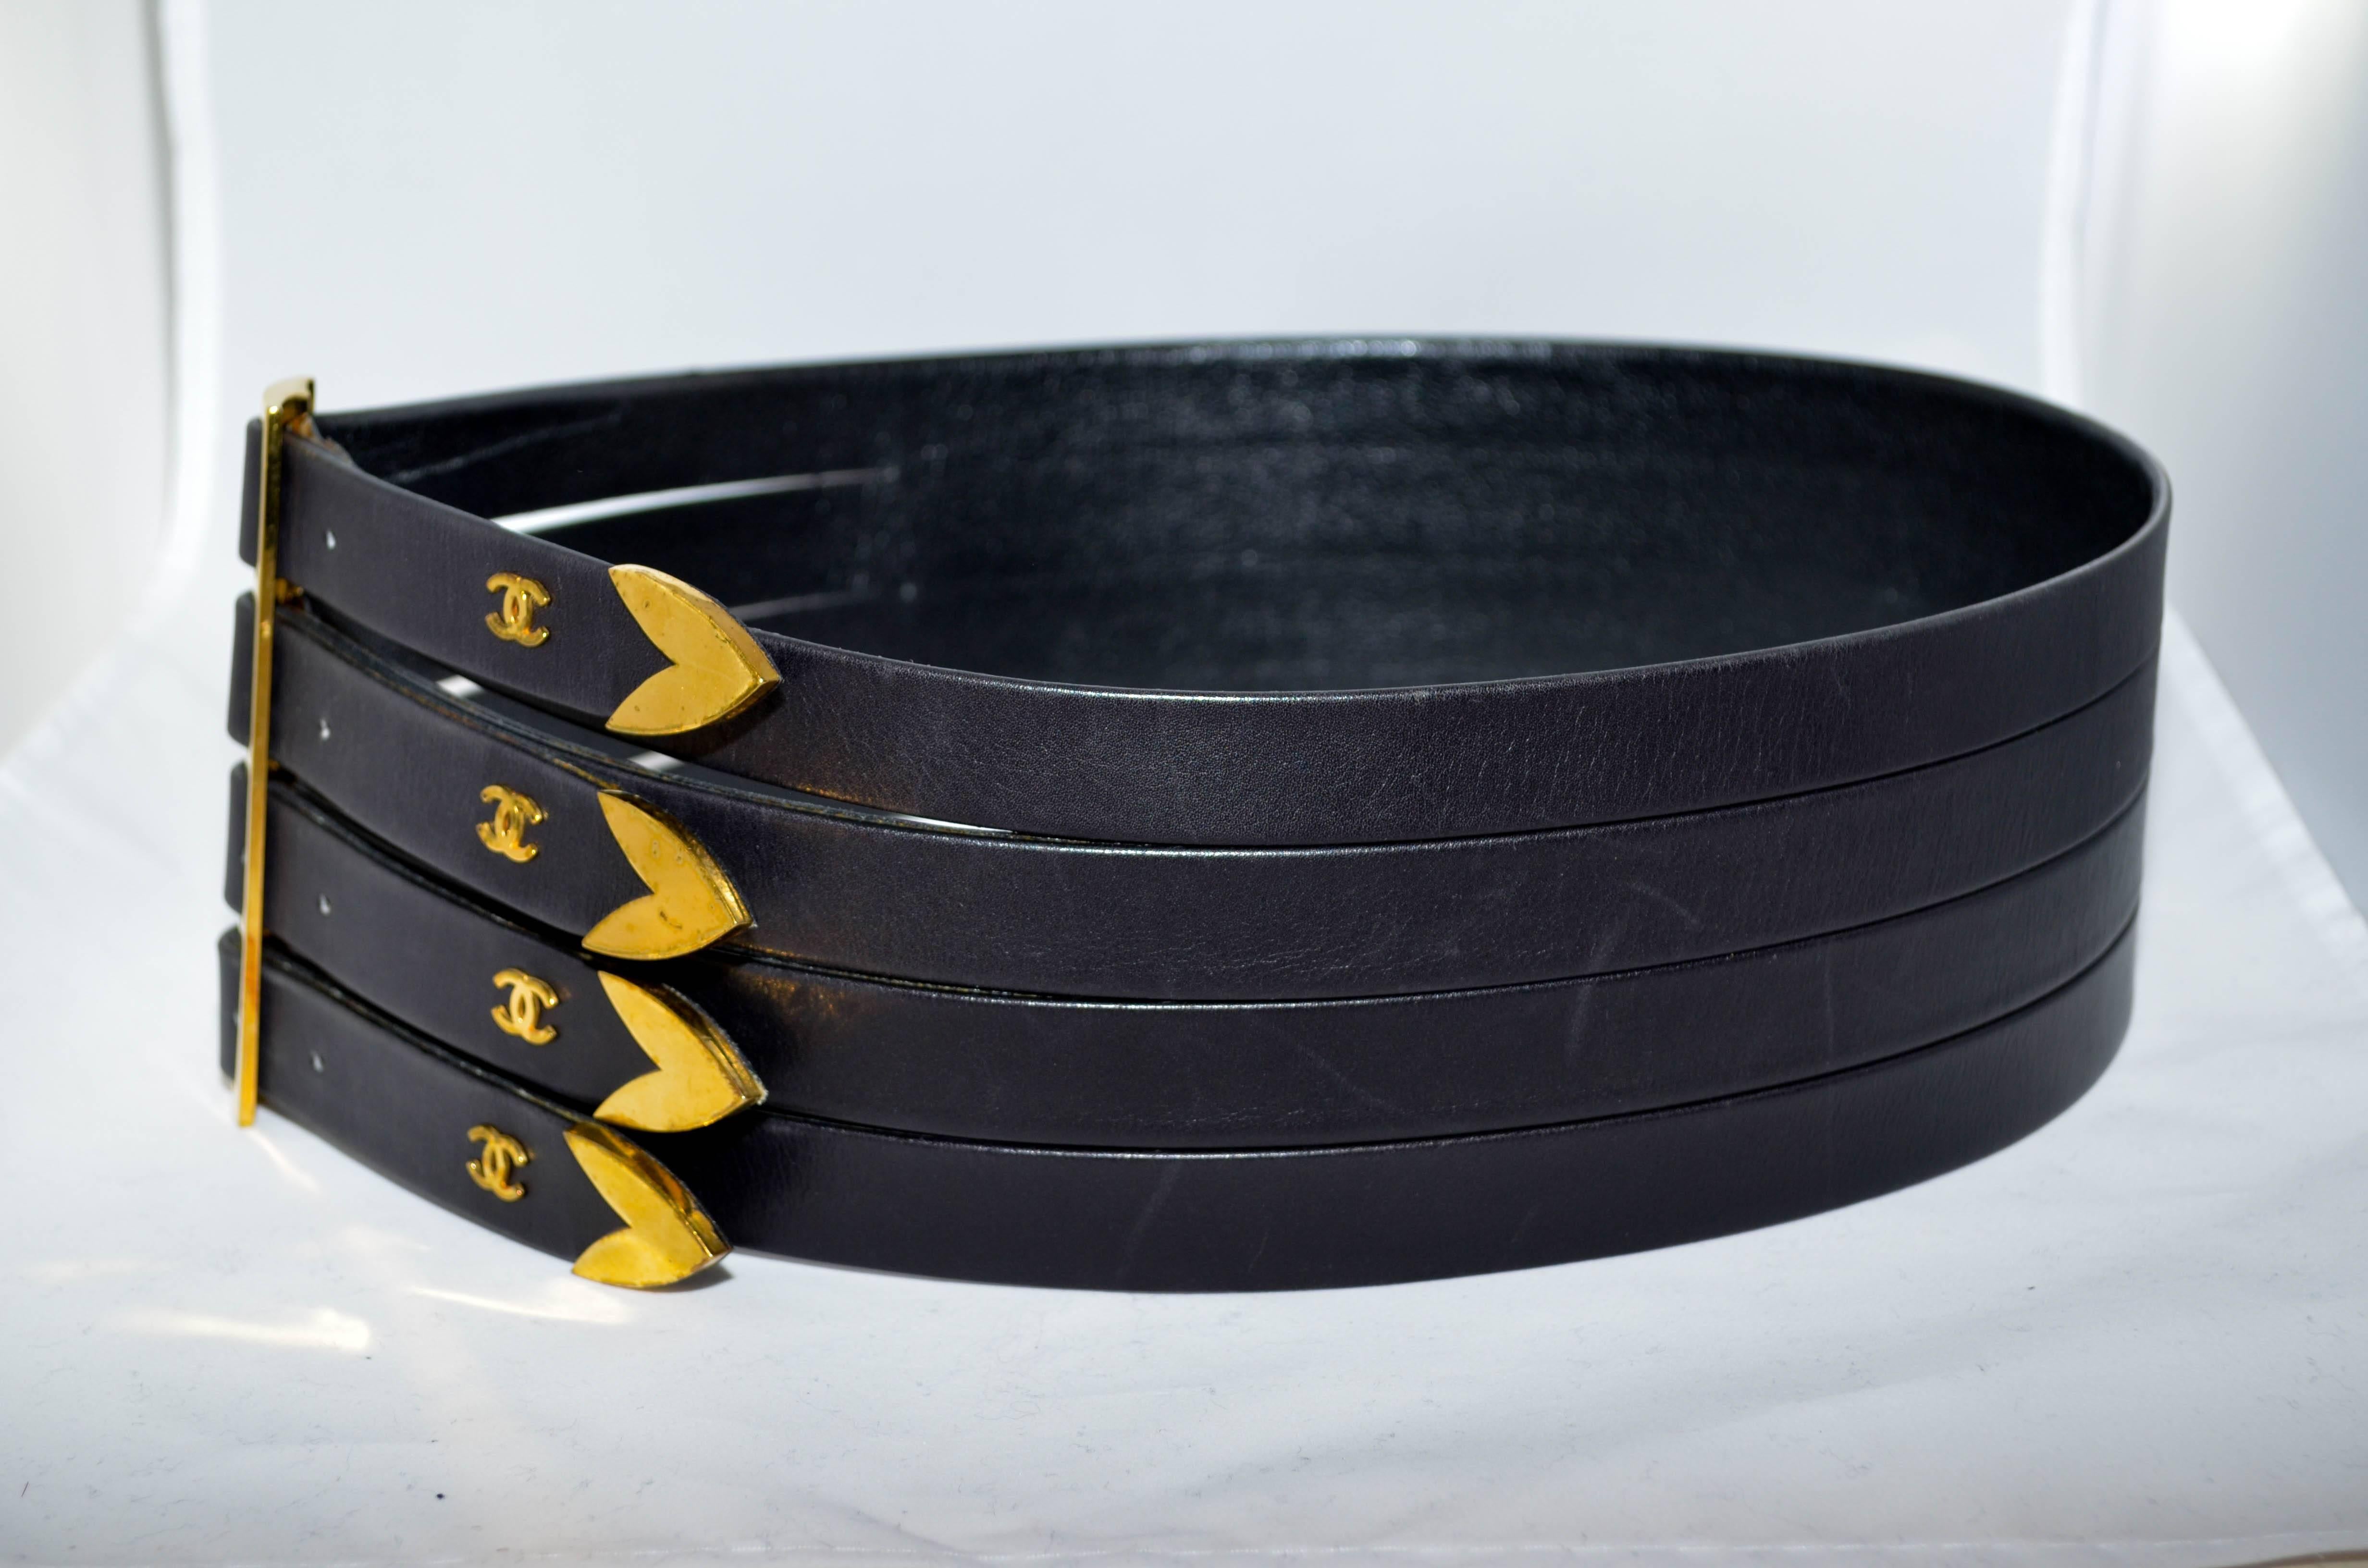 Fabulous and rare wide Chanel corset belt featuring four strips of leather 
 with 4 gold buckles and 4 gold  fasteners with gold tips and gold CC logos. Marked Chanel 85/34, Chanel, Made in France. From the 1980s, collection 29.
Measurements:
Total